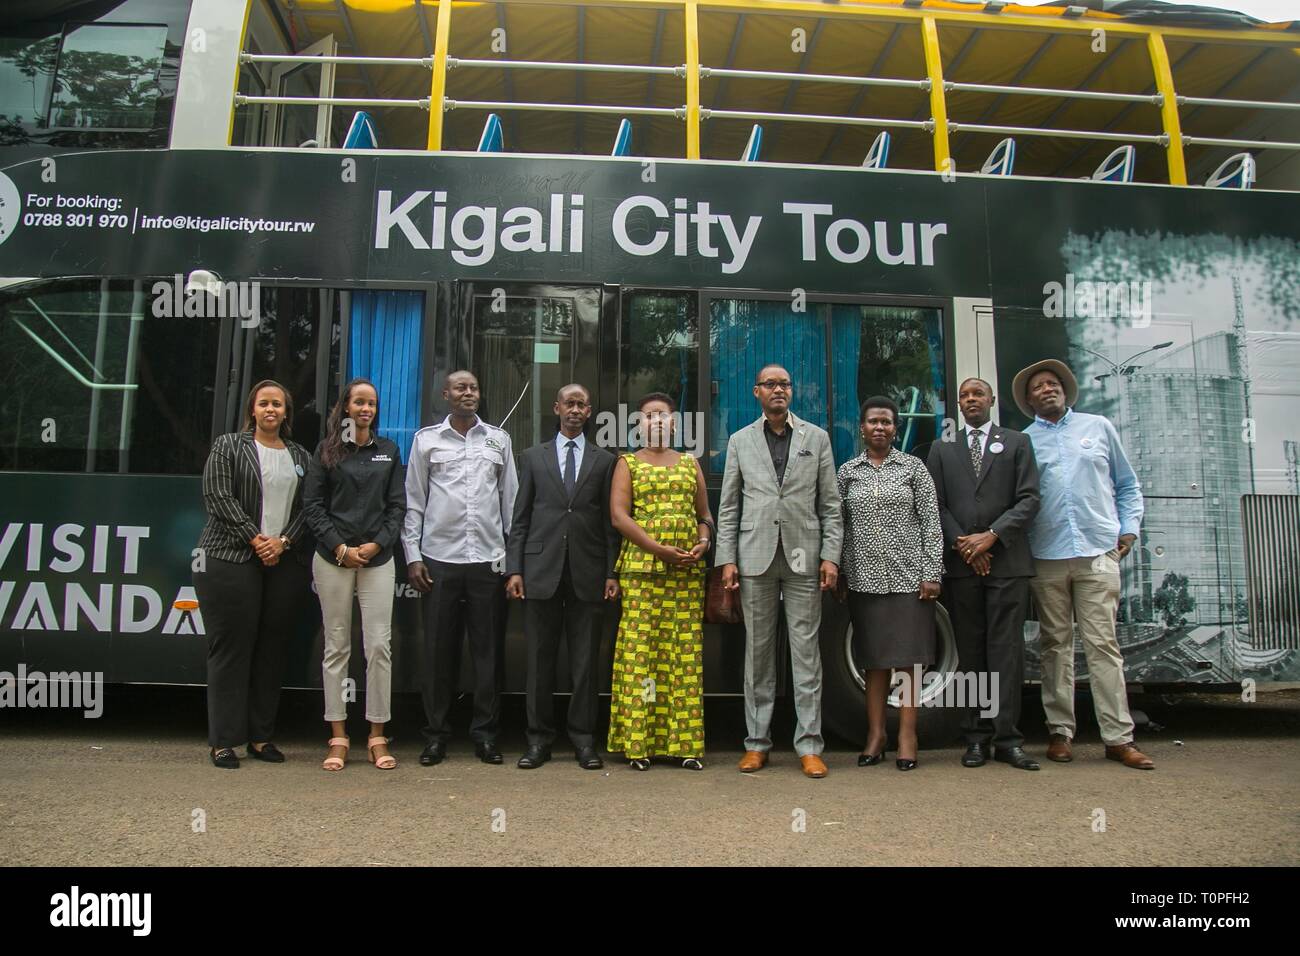 Kigali, Rwanda. 21st Mar, 2019. Guests pose for a photo in front of Kigali's first double-decker tour bus at its unveiling ceremony in Kigali, capital of Rwanda, on March 21, 2019. Rwanda Development Board in collaboration with Kigali City Tour Limited, a private company, on Thursday unveiled Kigali's first double-decker tour bus, which will be used for sightseeing in the city. Credit: Cyril Ndegeya/Xinhua/Alamy Live News Stock Photo